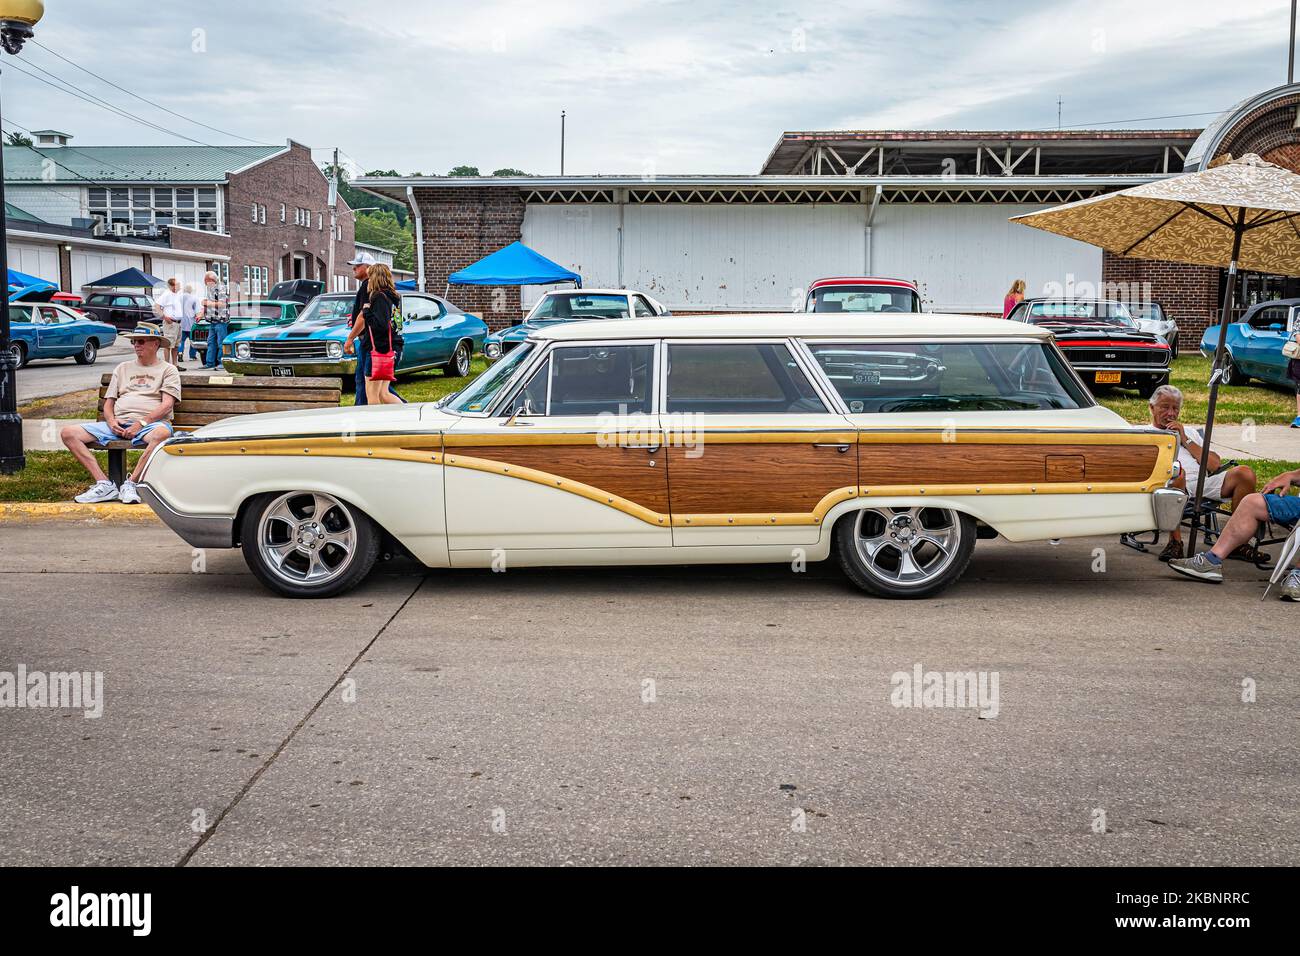 Des Moines, IA - July 01, 2022: High perspective side view of a 1964 Mercury Colony Park Station Wagon at a local car show. Stock Photo